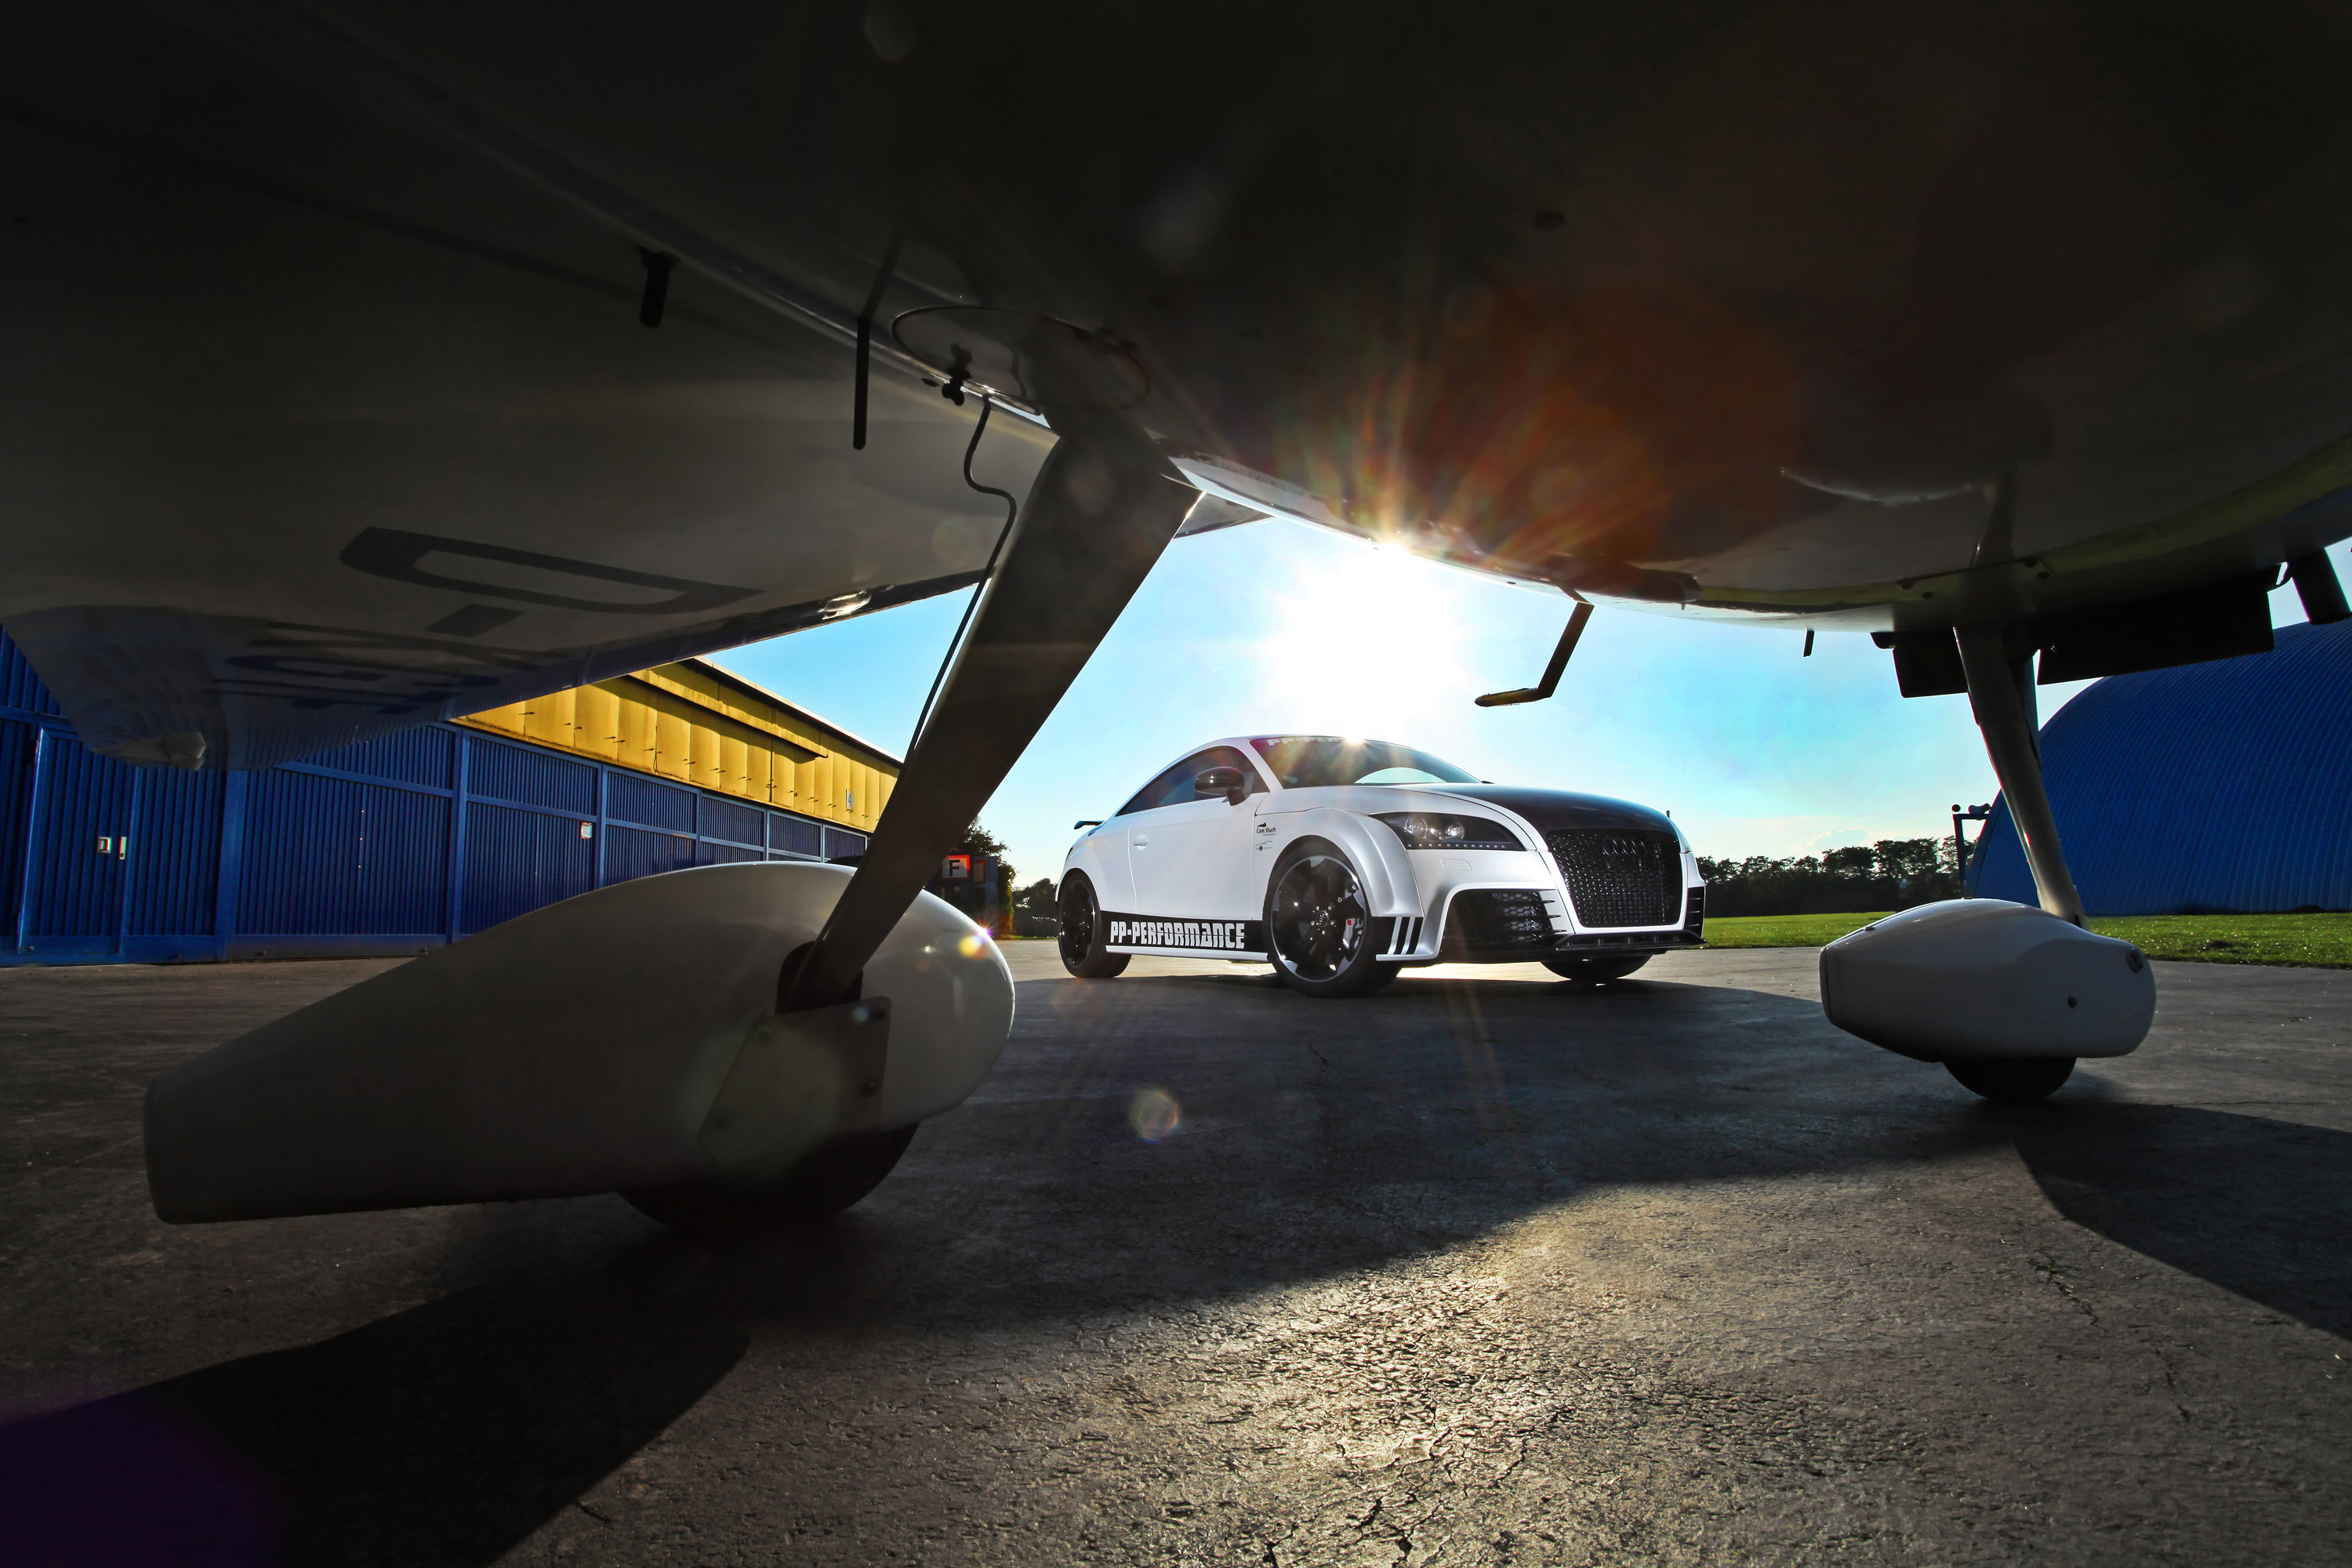 Cam Shaft Audi TT RS White Edition by PP-Performance